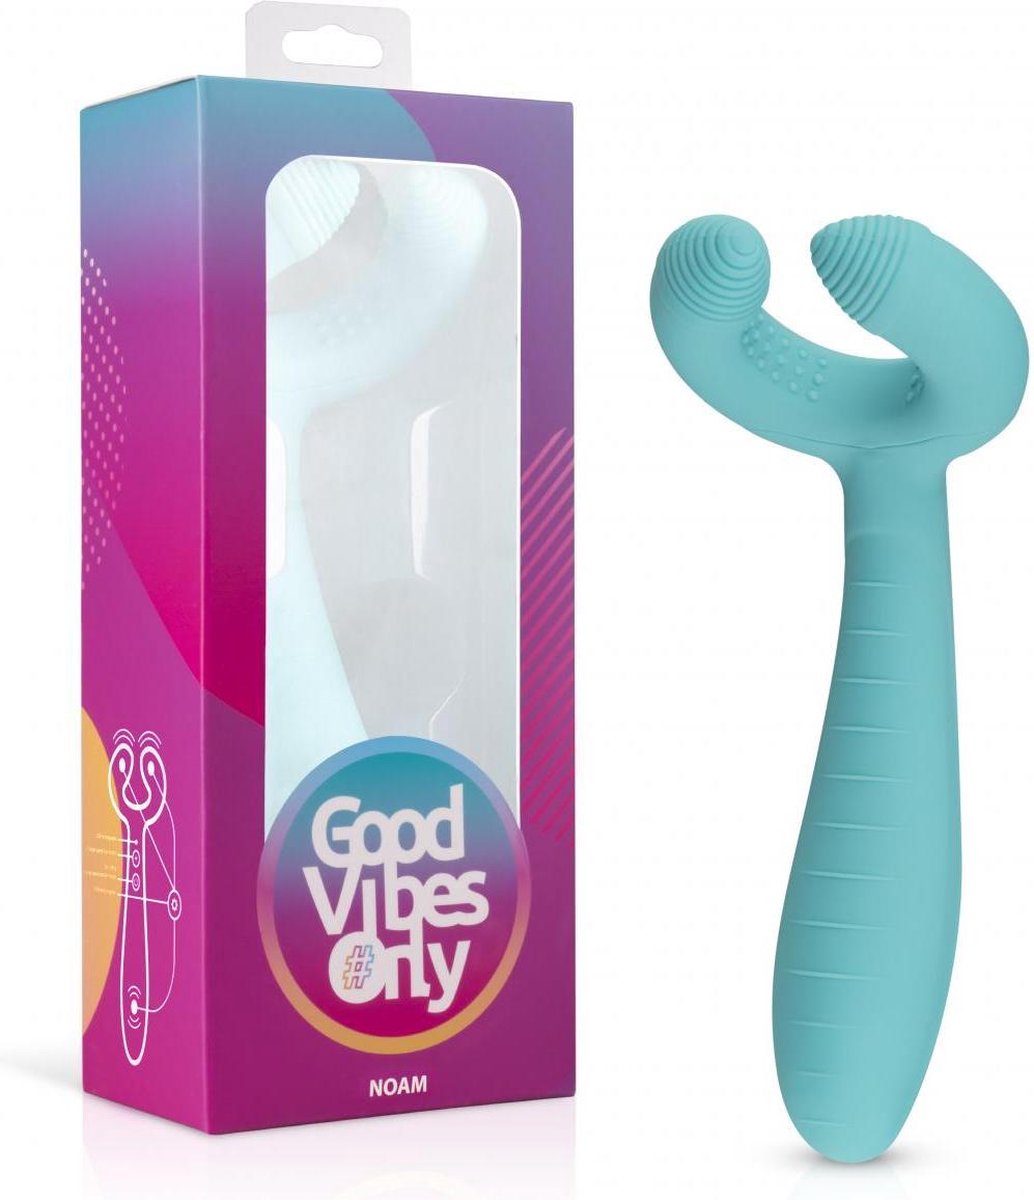 Good Vibes Only Noam Pair Vibrator - Turquoise